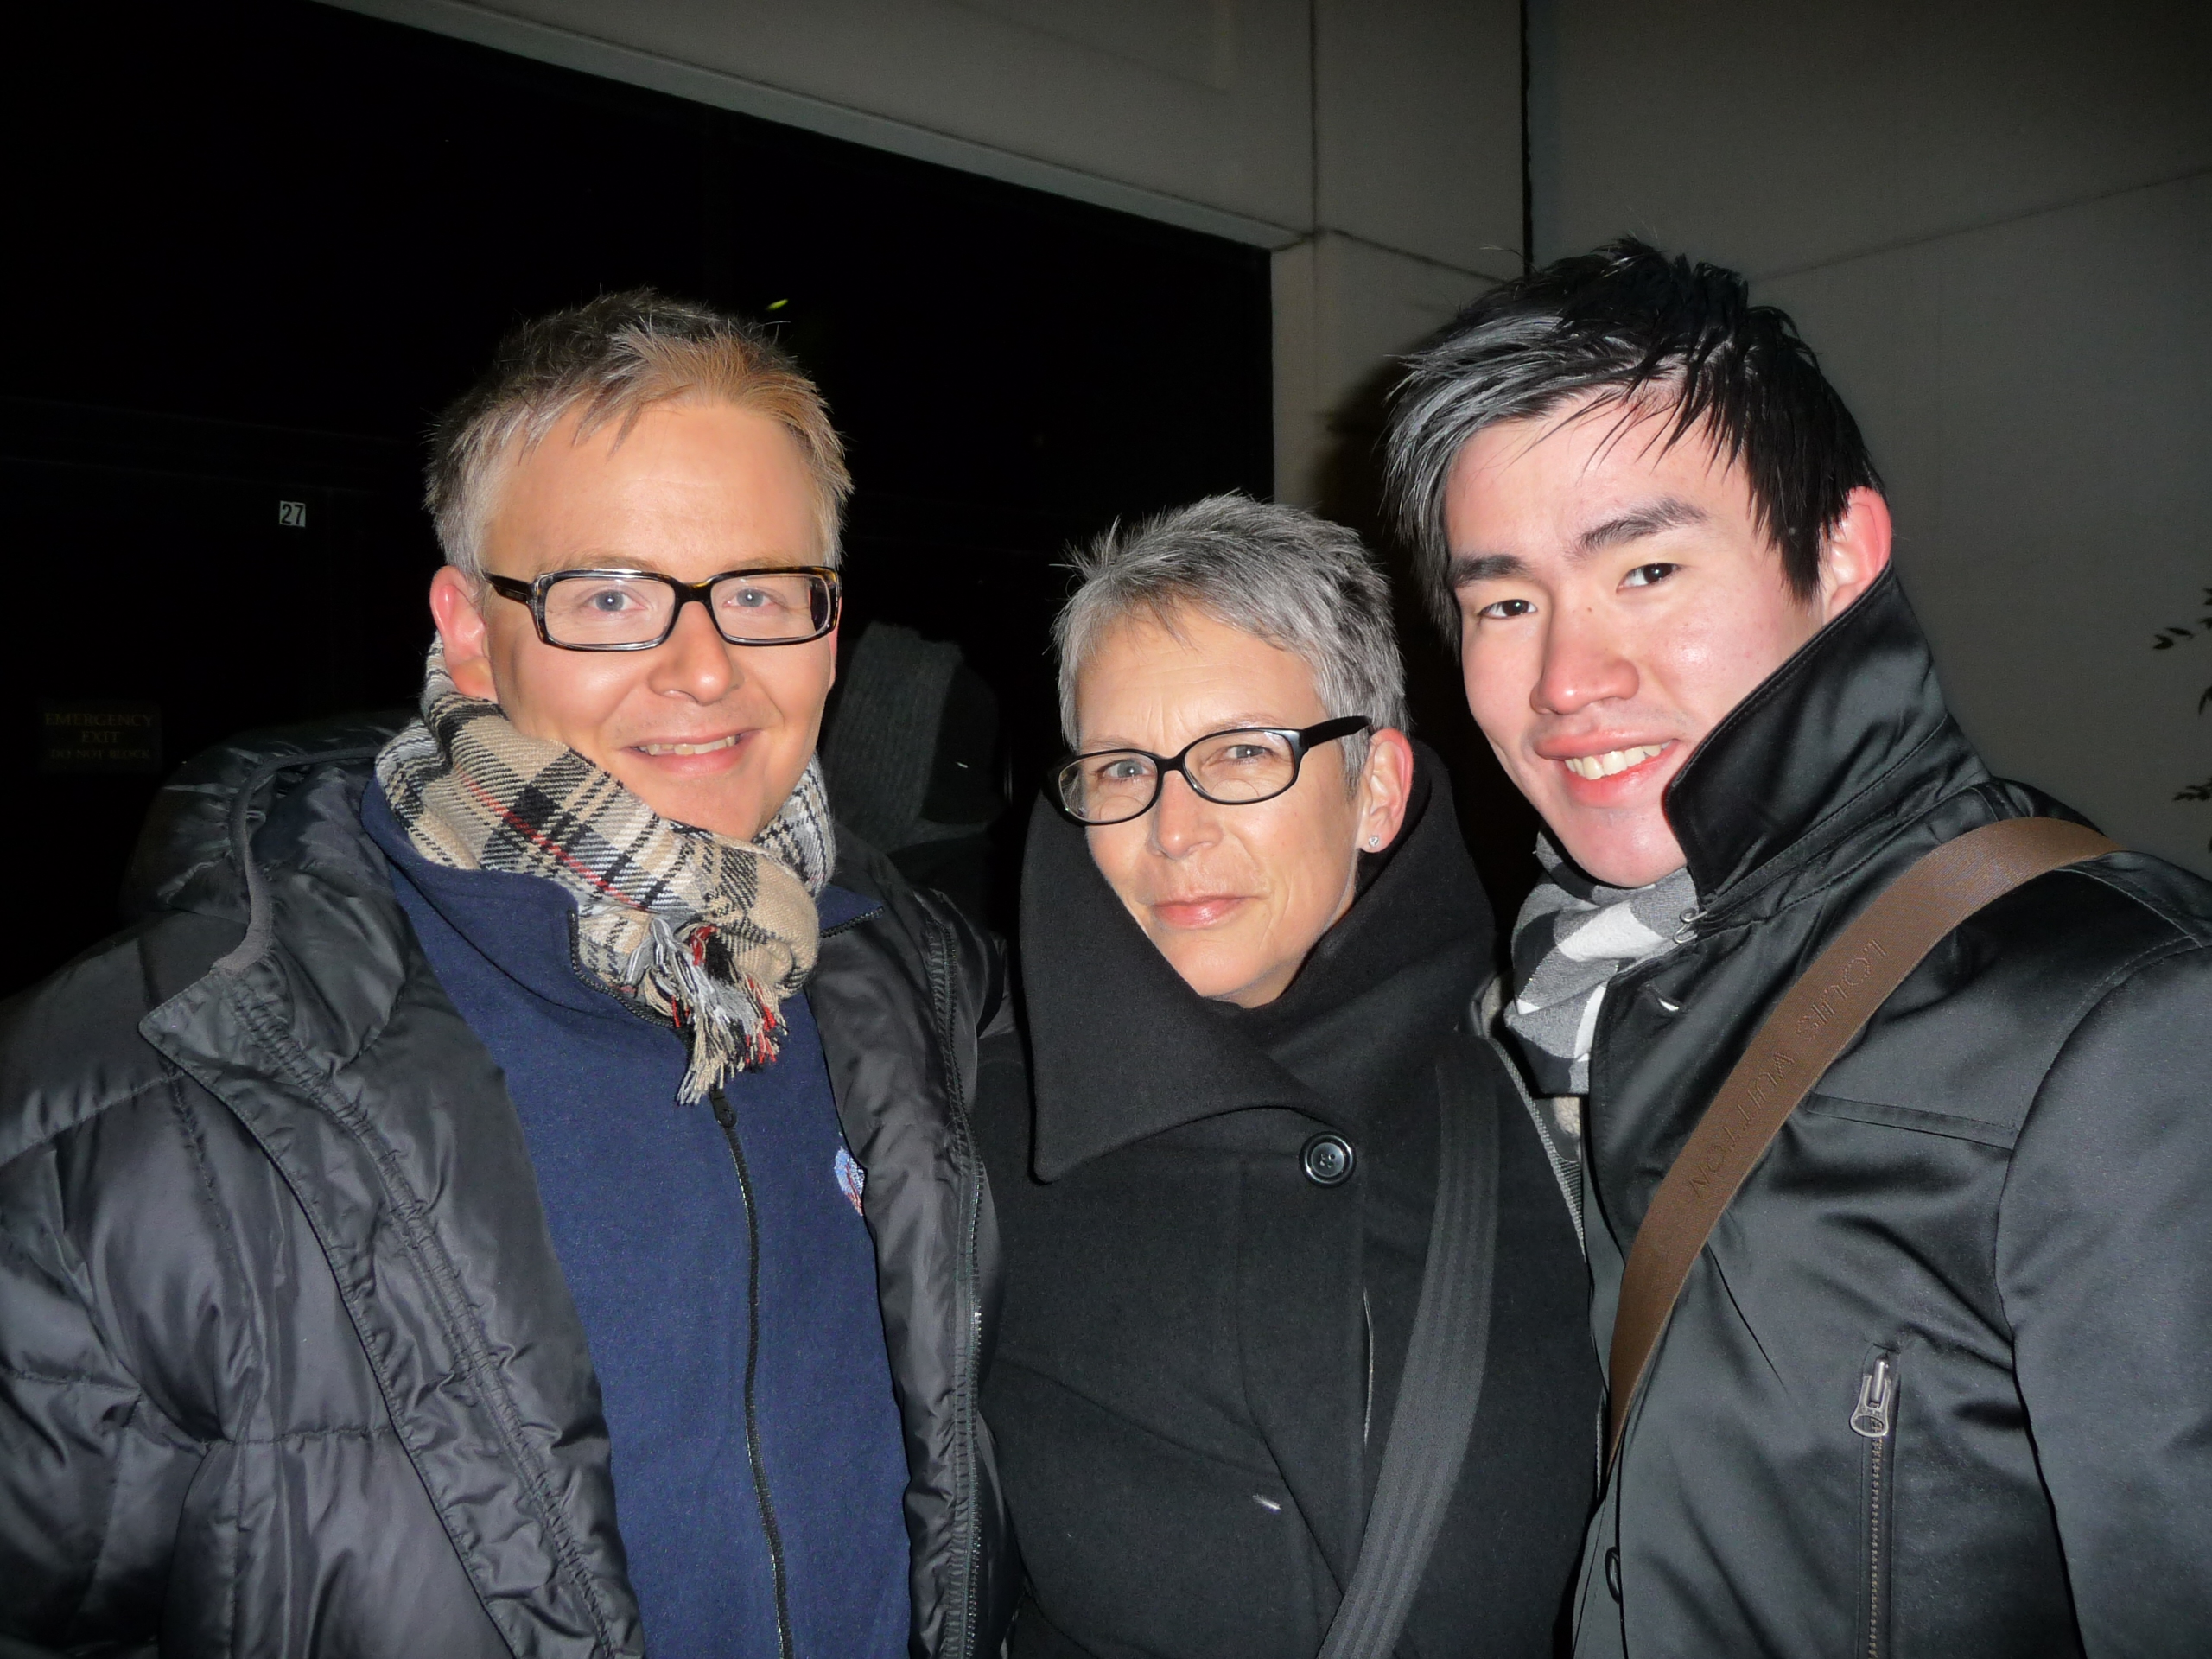 Jesper W. Rasmussen with Jamie Lee Curtis on the morning of President Obama's Inauguration